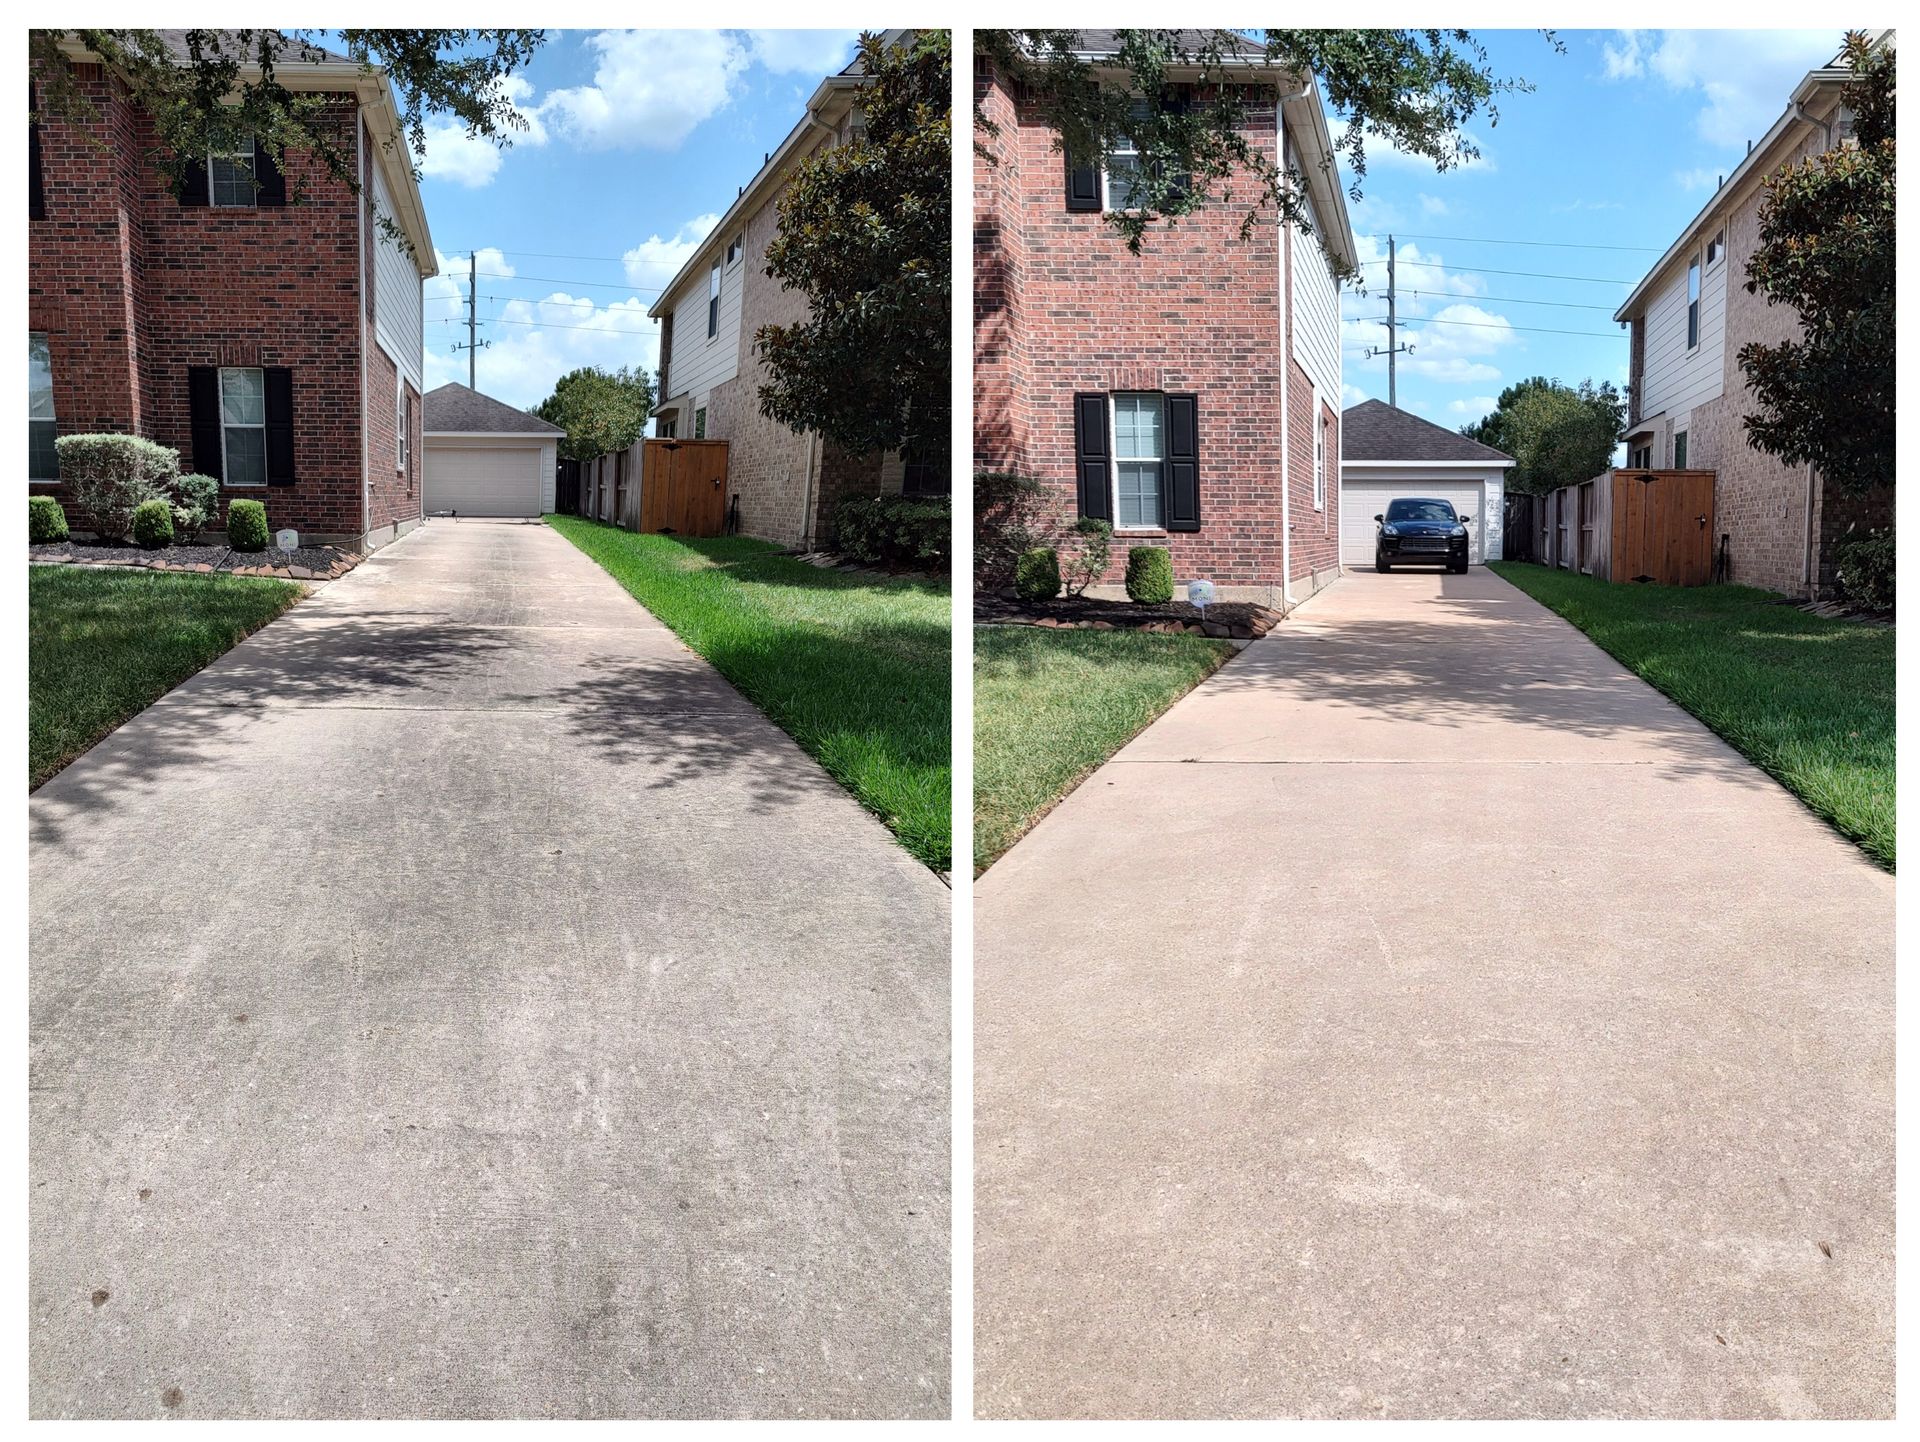 Pressure washing  Driveway before and after